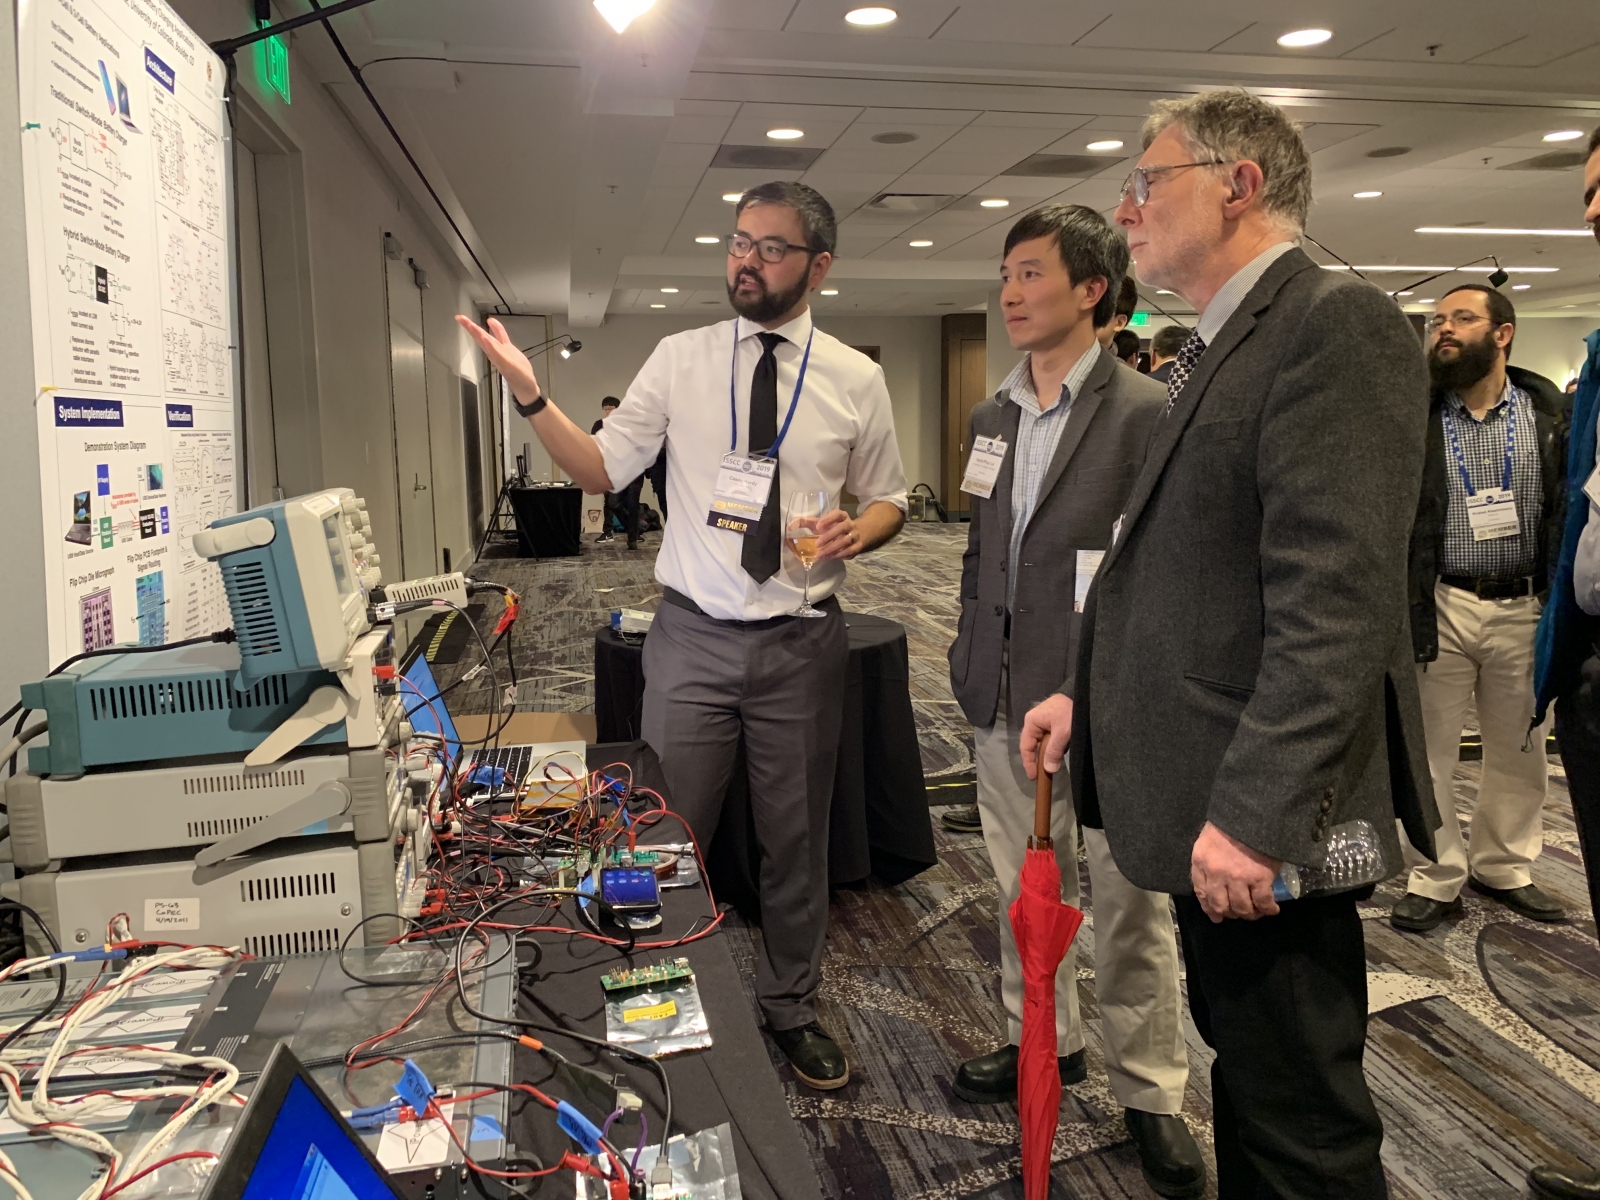 201902 - Casey at ISSCC Demo